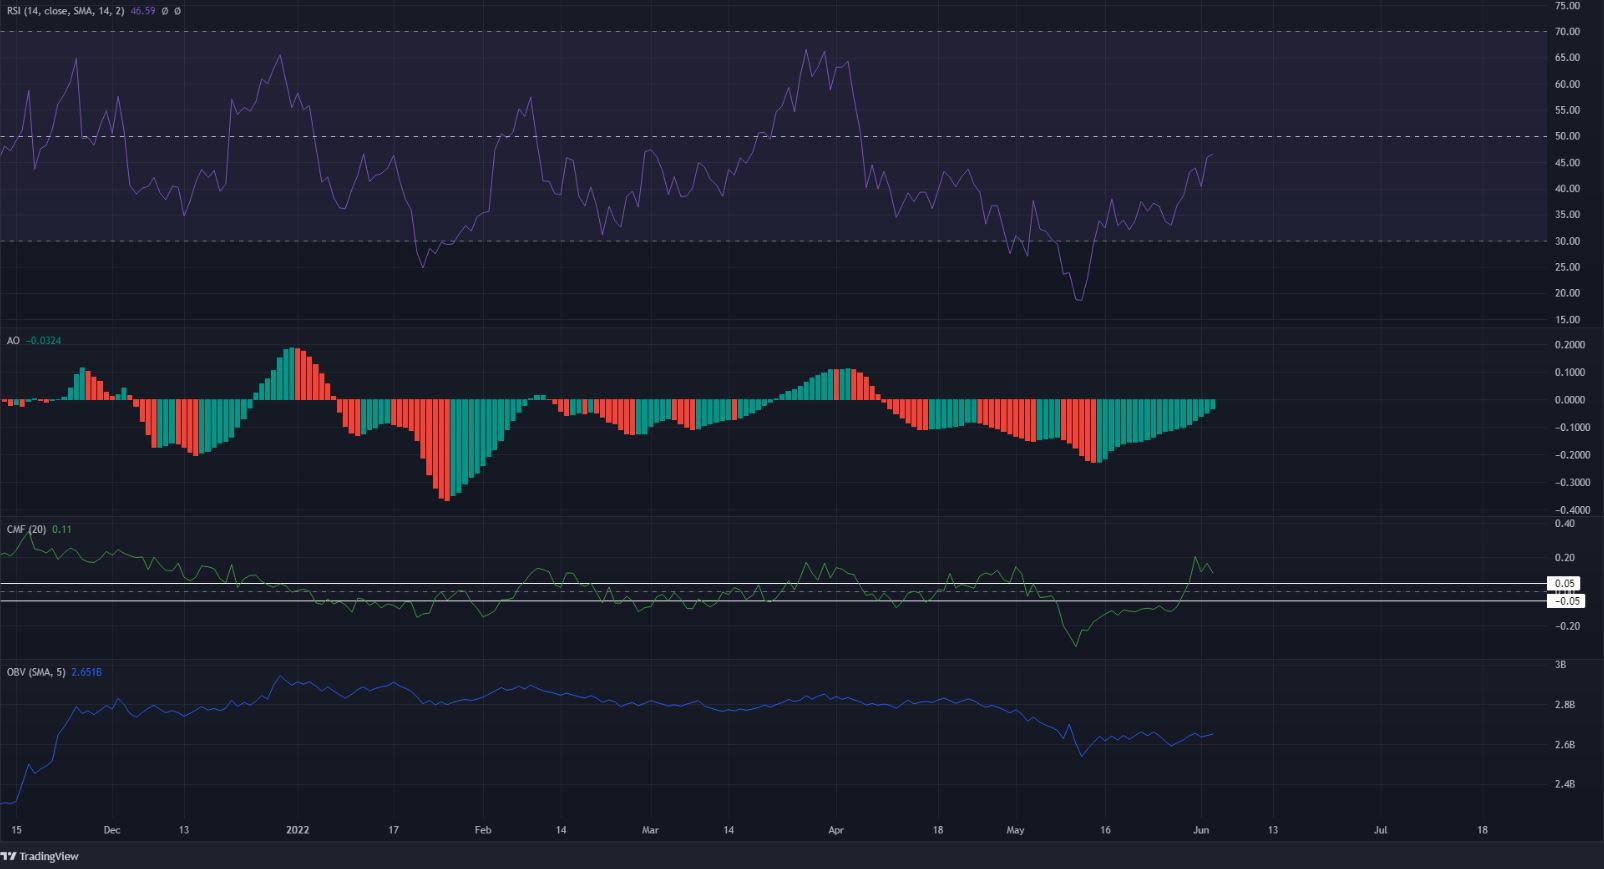 IOTA approaches resistance and new lows could be set in the weeks to come